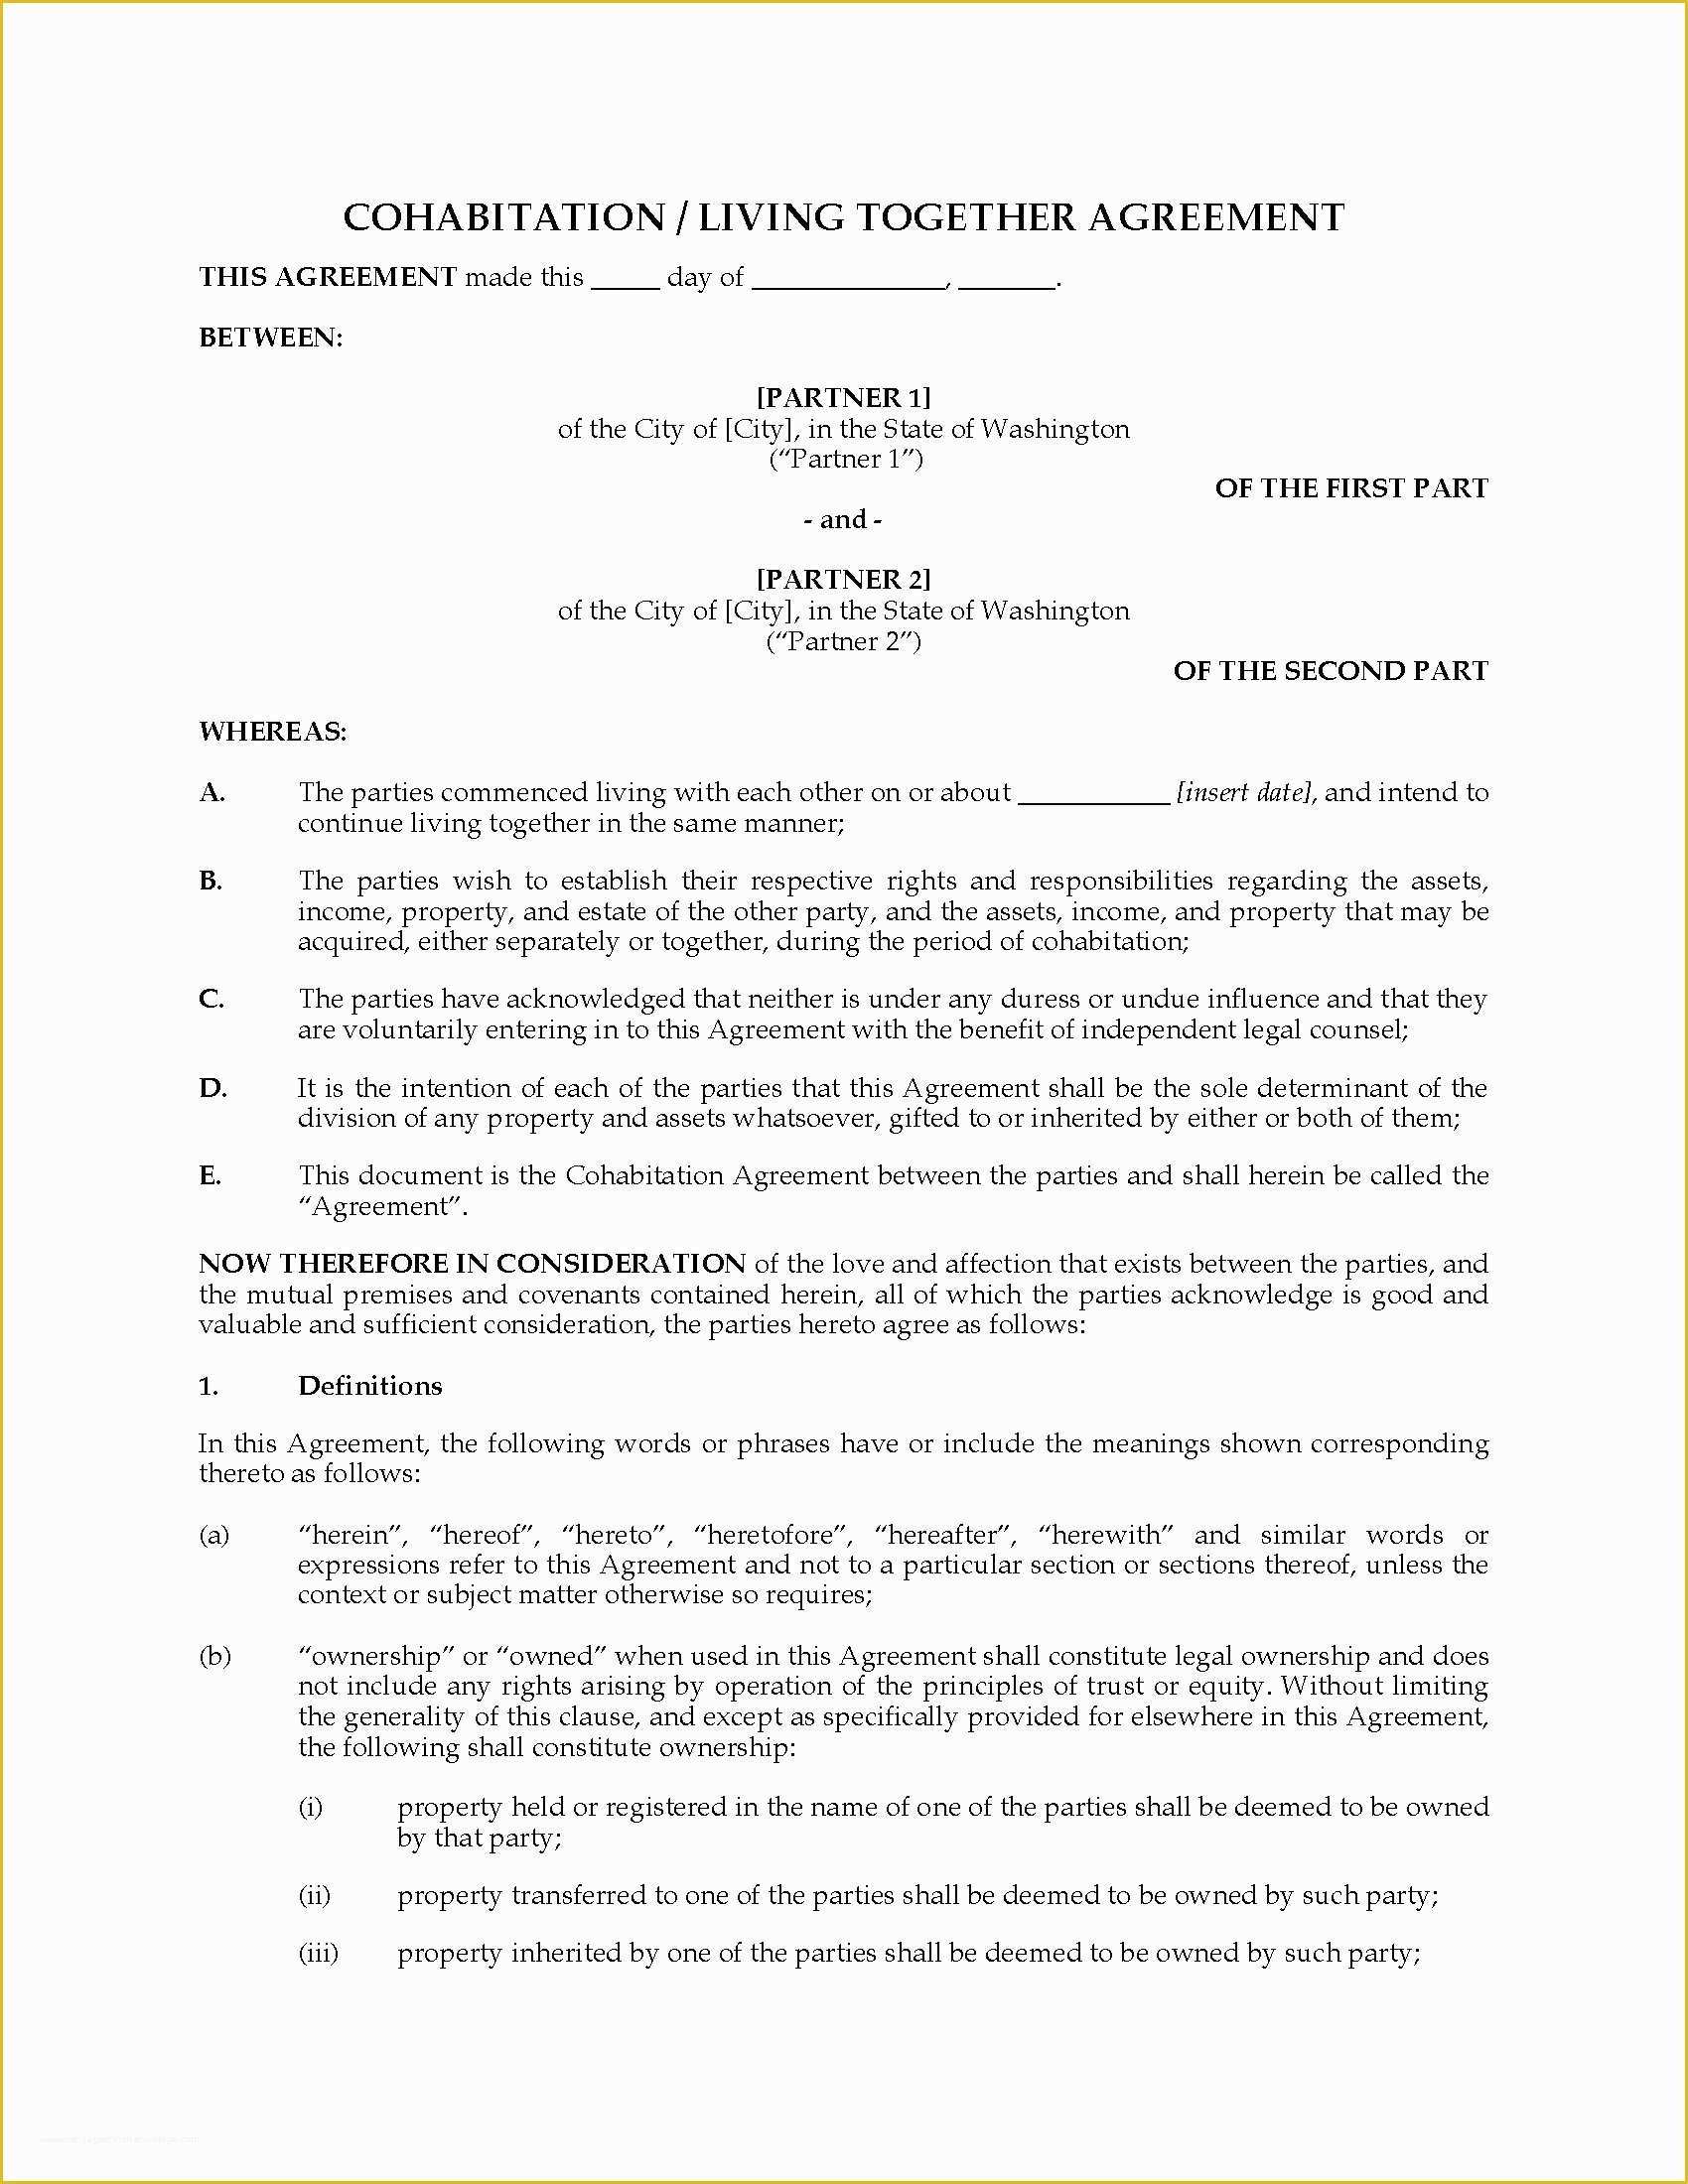 Living together Agreement Template Free Of Washington Cohabitation Living to Her Agreement